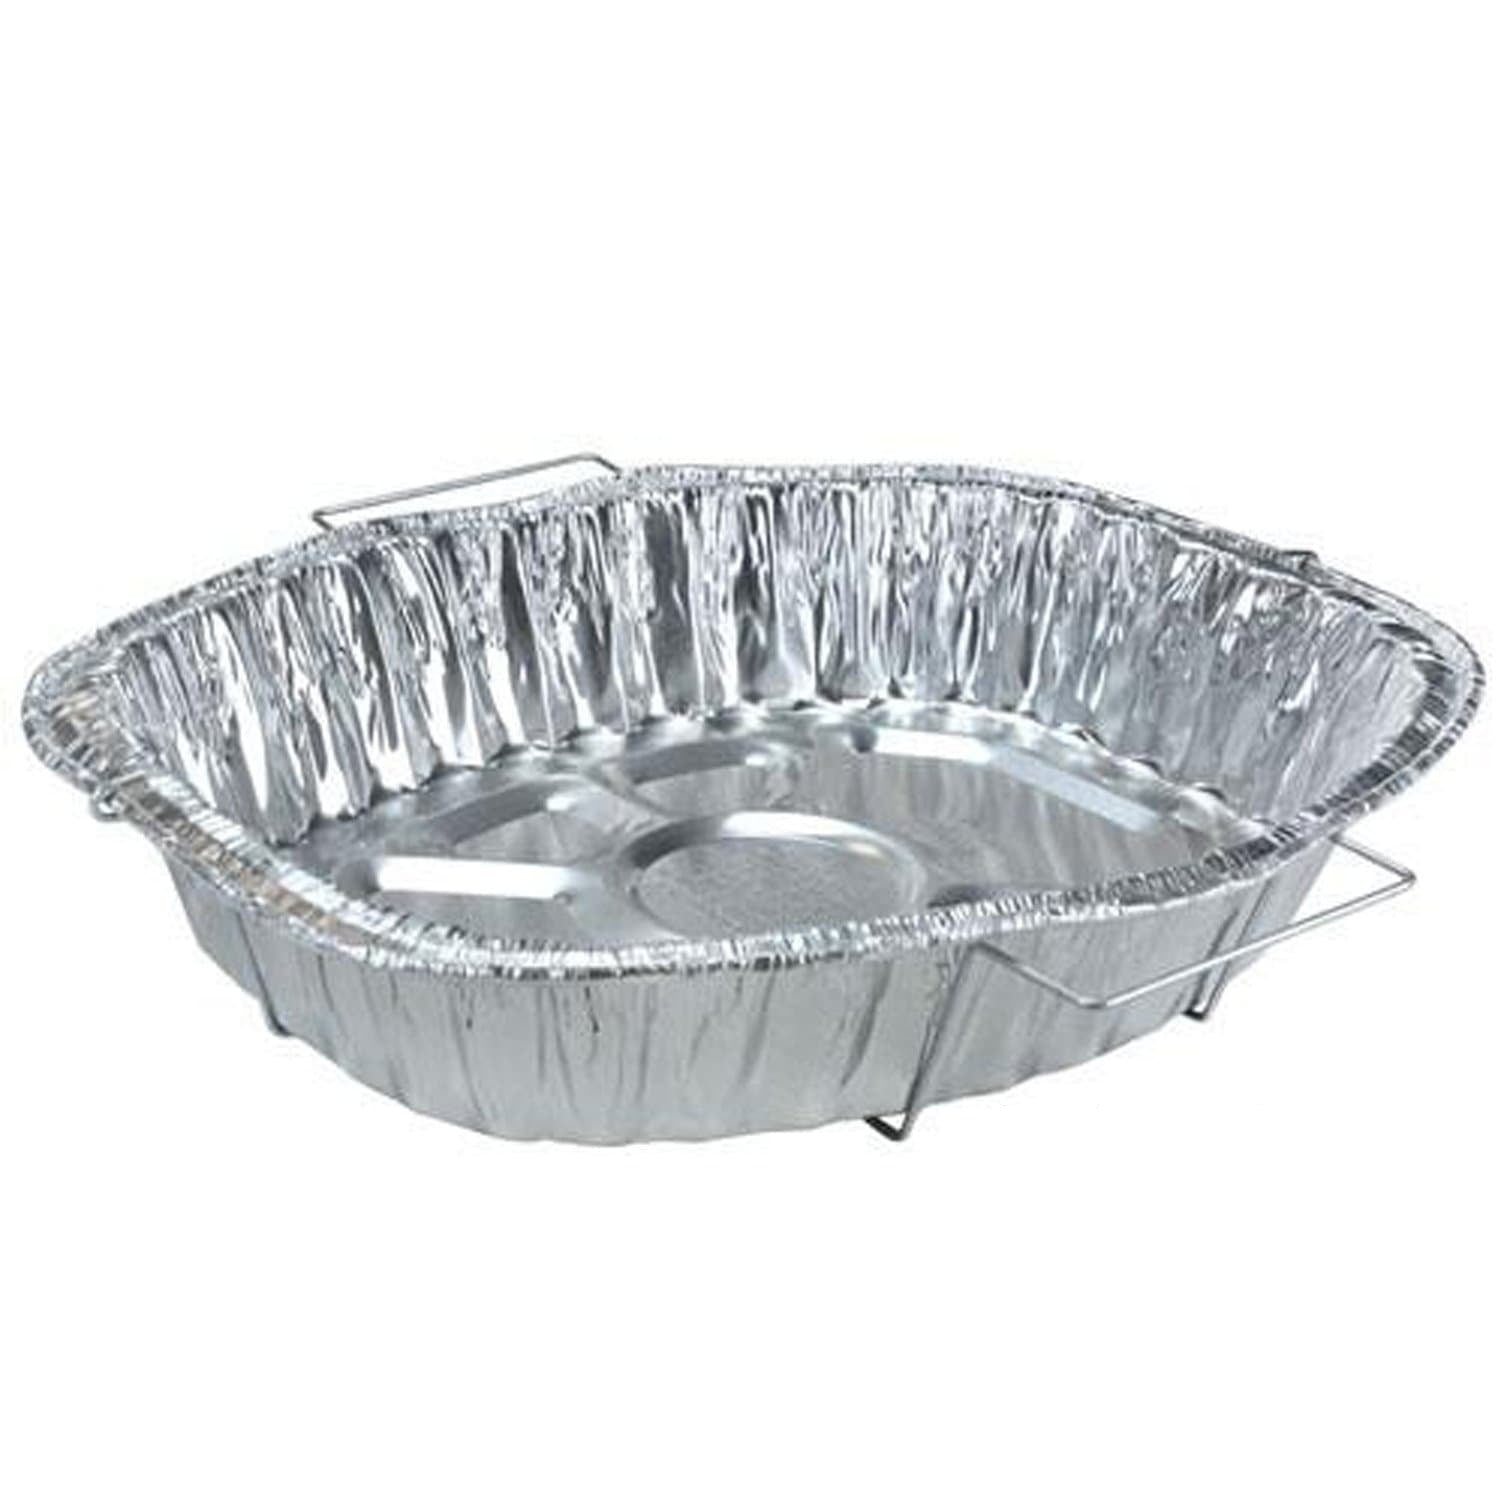 Durable Disposable Aluminum Foil Steam Roaster Pans, Full Size Deep, Heavy  Duty Baking Roasting Broiling 17 X 12.5 X 3 Thanksgiving 30 